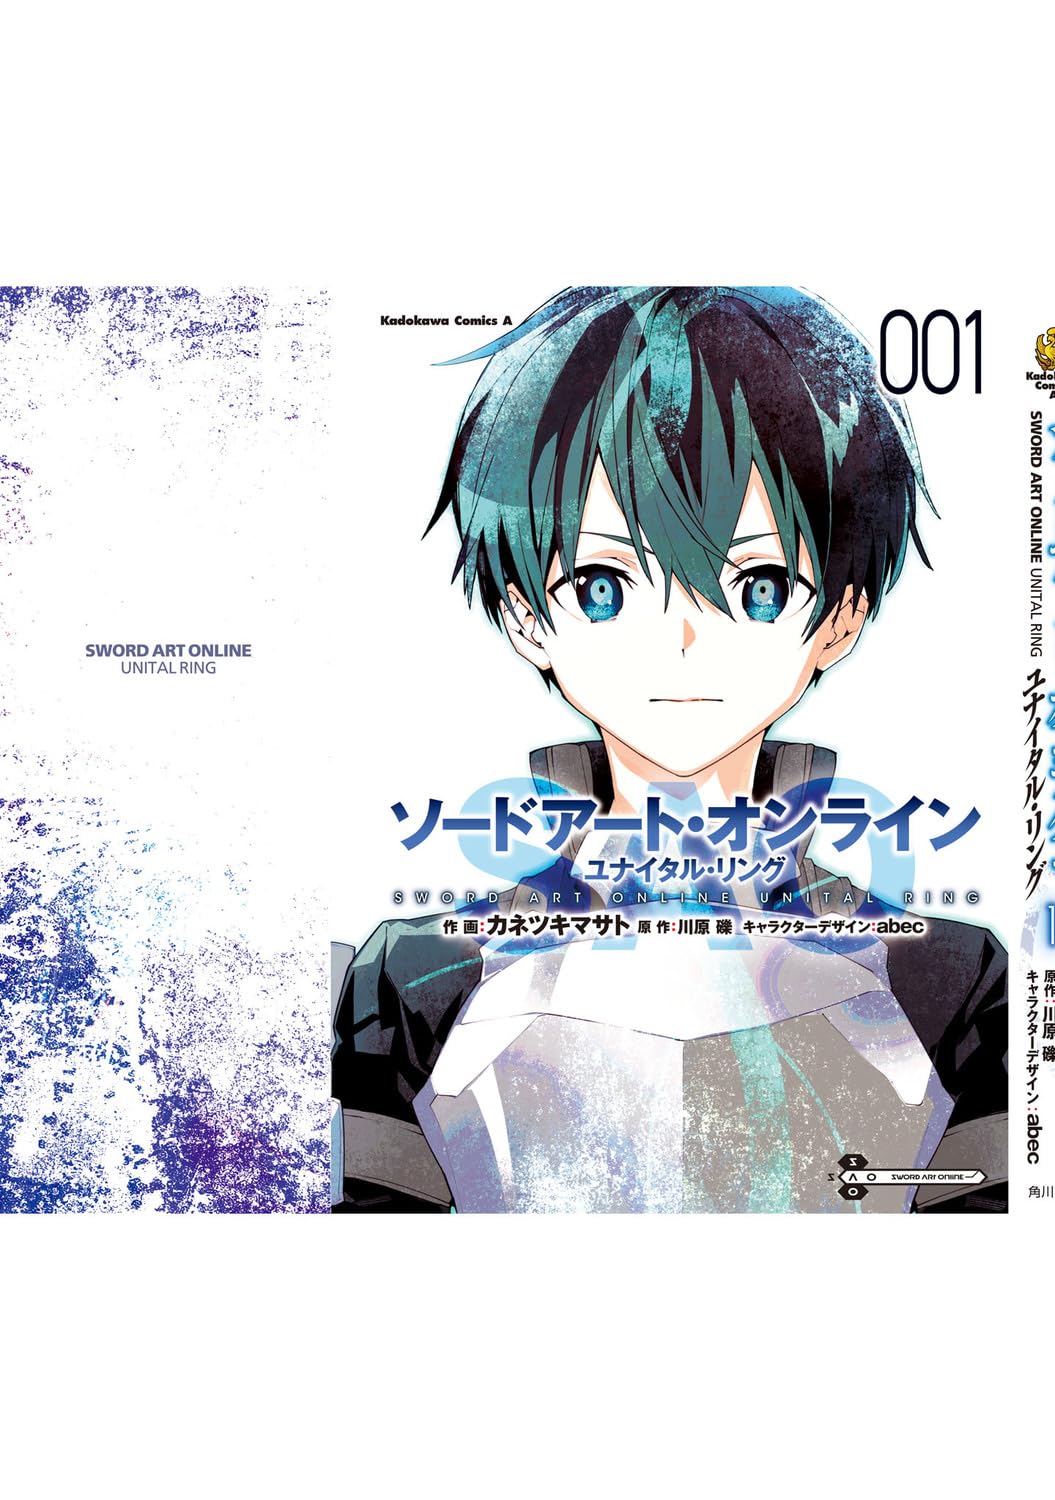 SAO Volume 23 Unital Ring 2 Review/Discussion - YouTube